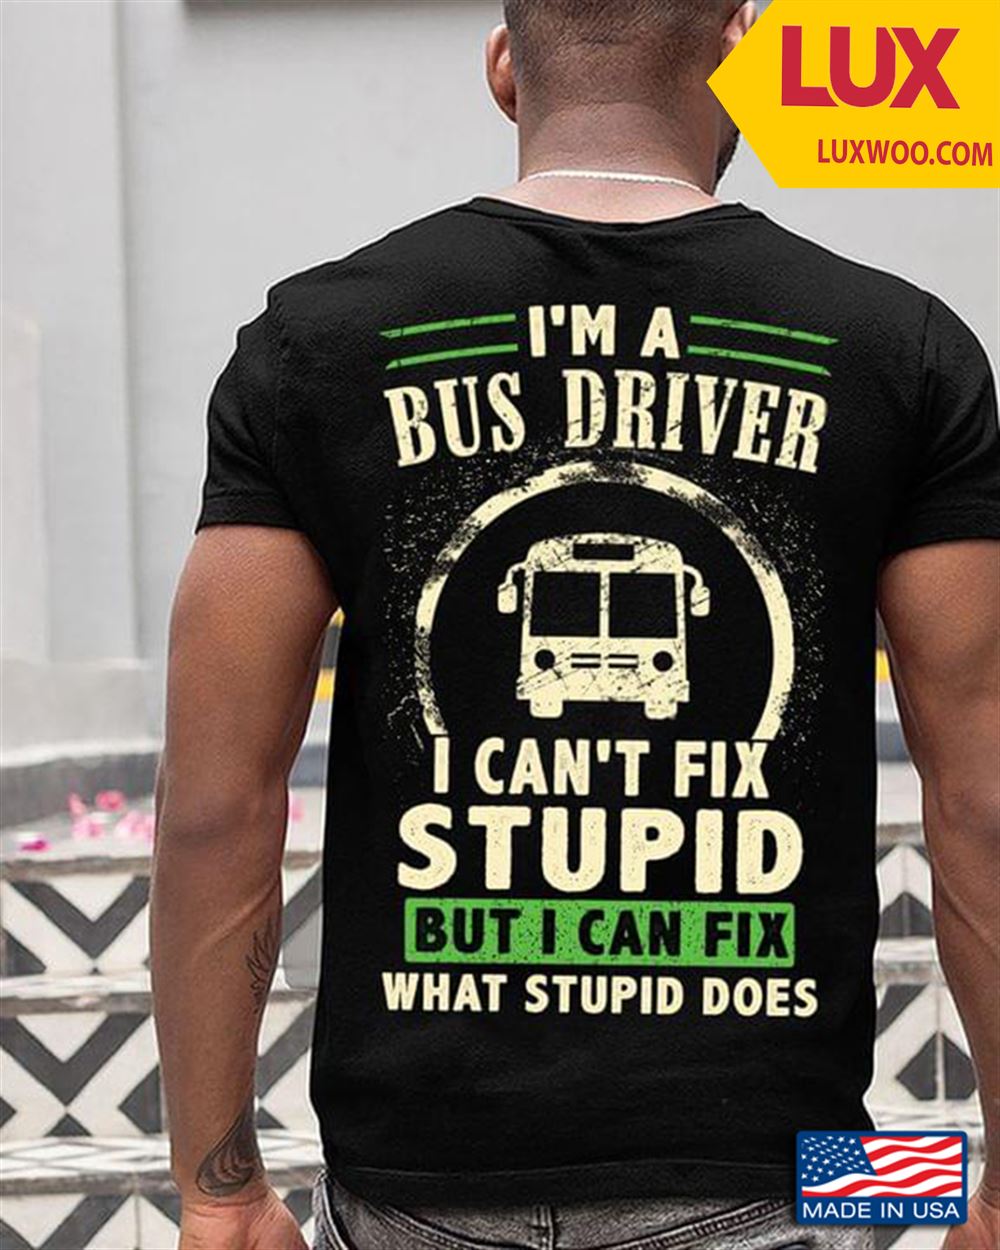 Im A Bus Driver I Cant Fix Stupid But I Can Fix What Stupid Does Shirt Size Up To 5xl